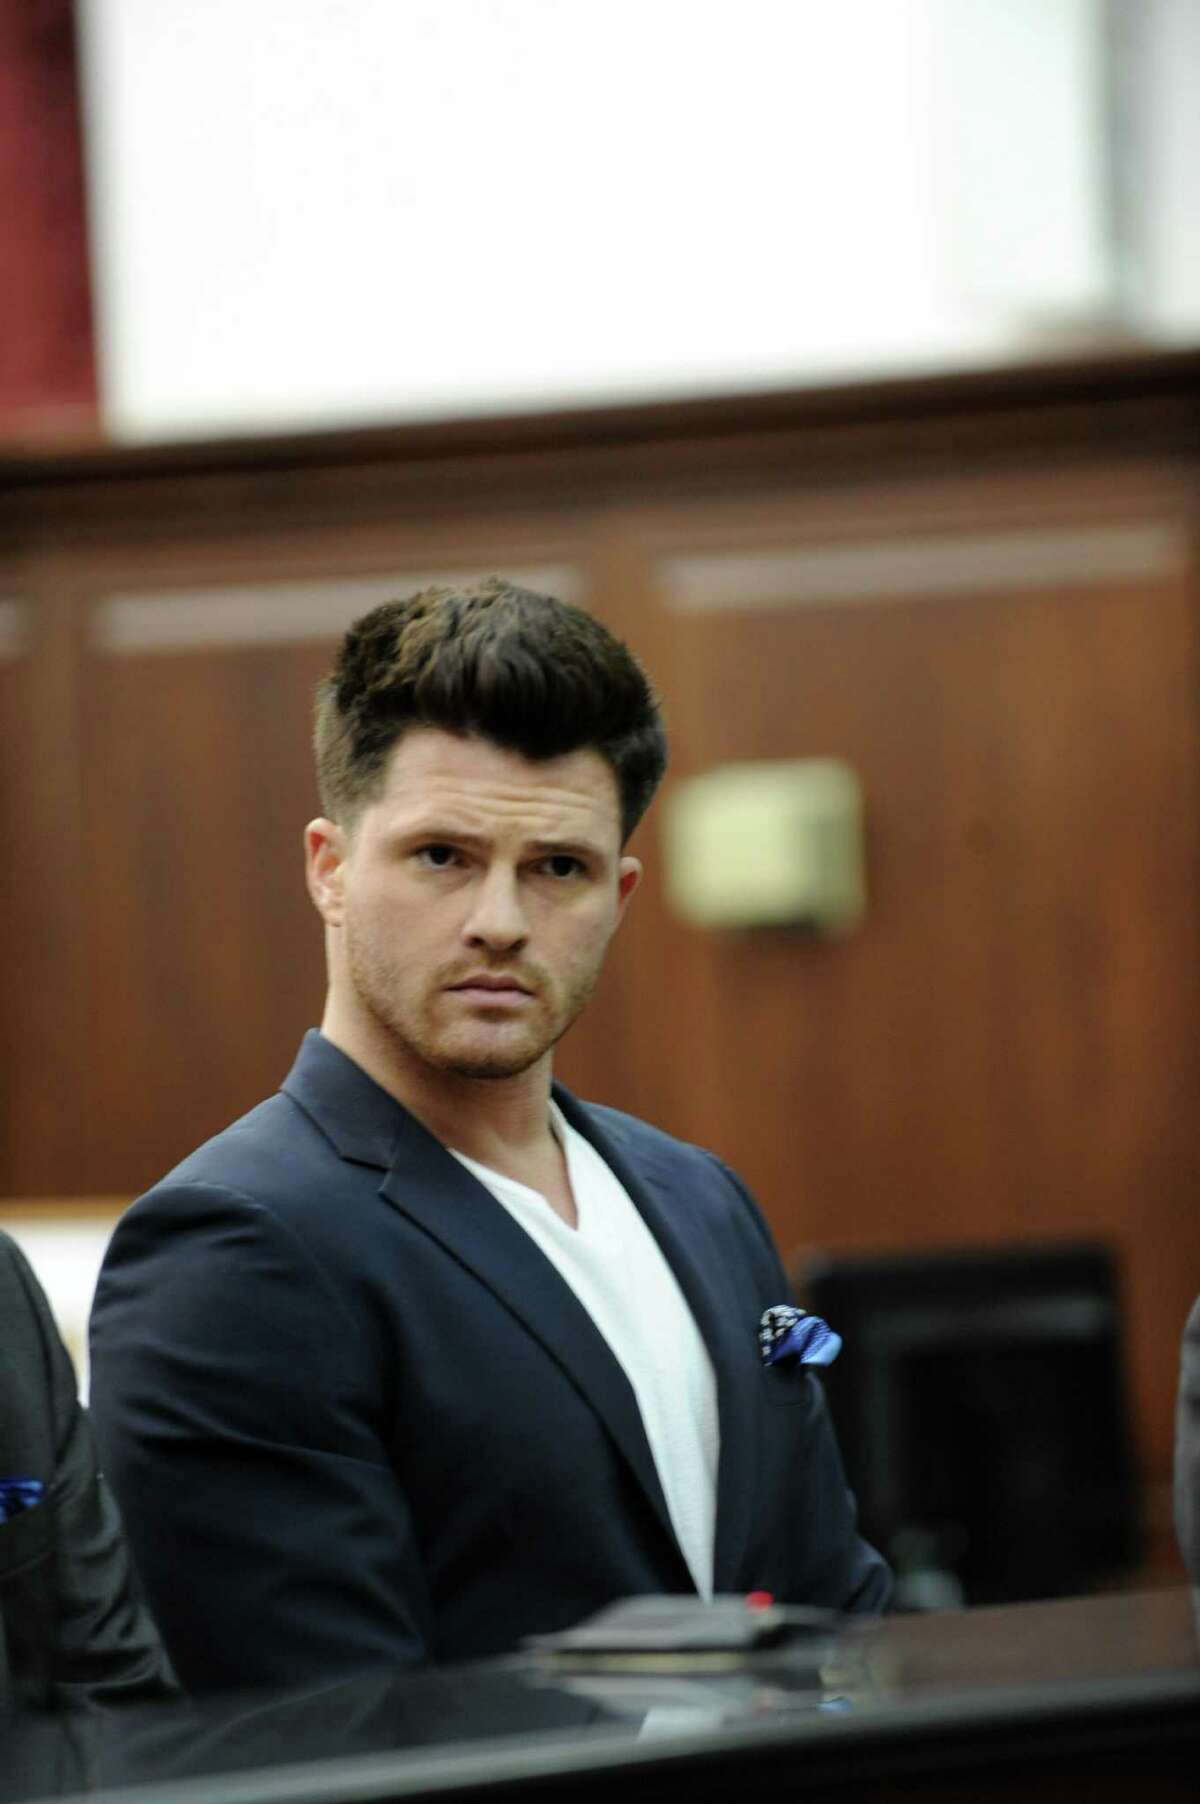 James Rackover, who has been charged in connection with the stabbing death of Joey Comunale of Stamford, Conn, was arraigned in Criminal Court in New York on Friday, Nov. 18, 2016. Rackover was charged with concealment of a human corpse, tampering with physical evidence and hindering prosecution. He was not arraigned on the second-degree murder charge that the New York Police Department arrested him for on Thursday.